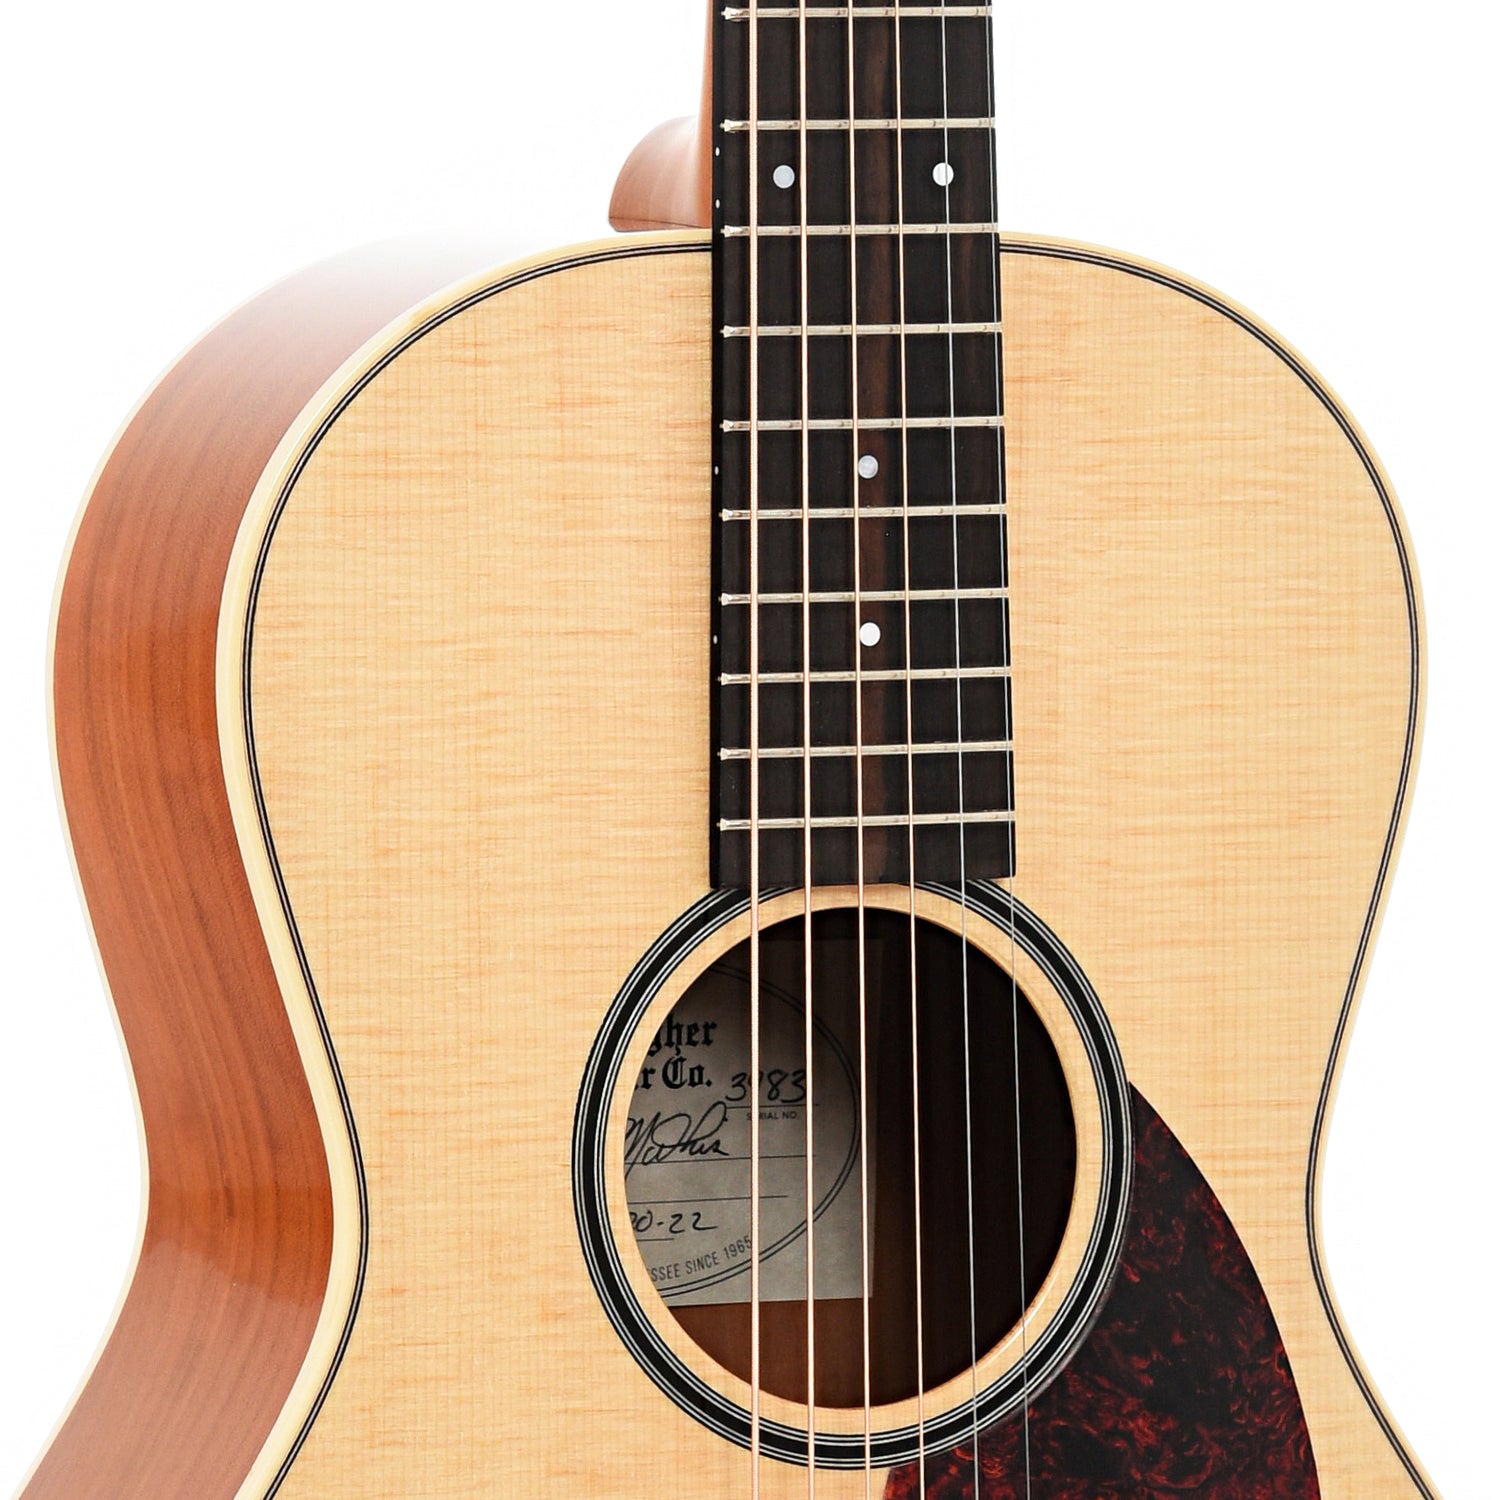 Sound hole of Gallagher Guitar Co. "The Founder's Guitar" P-50 Cherry Parlor 